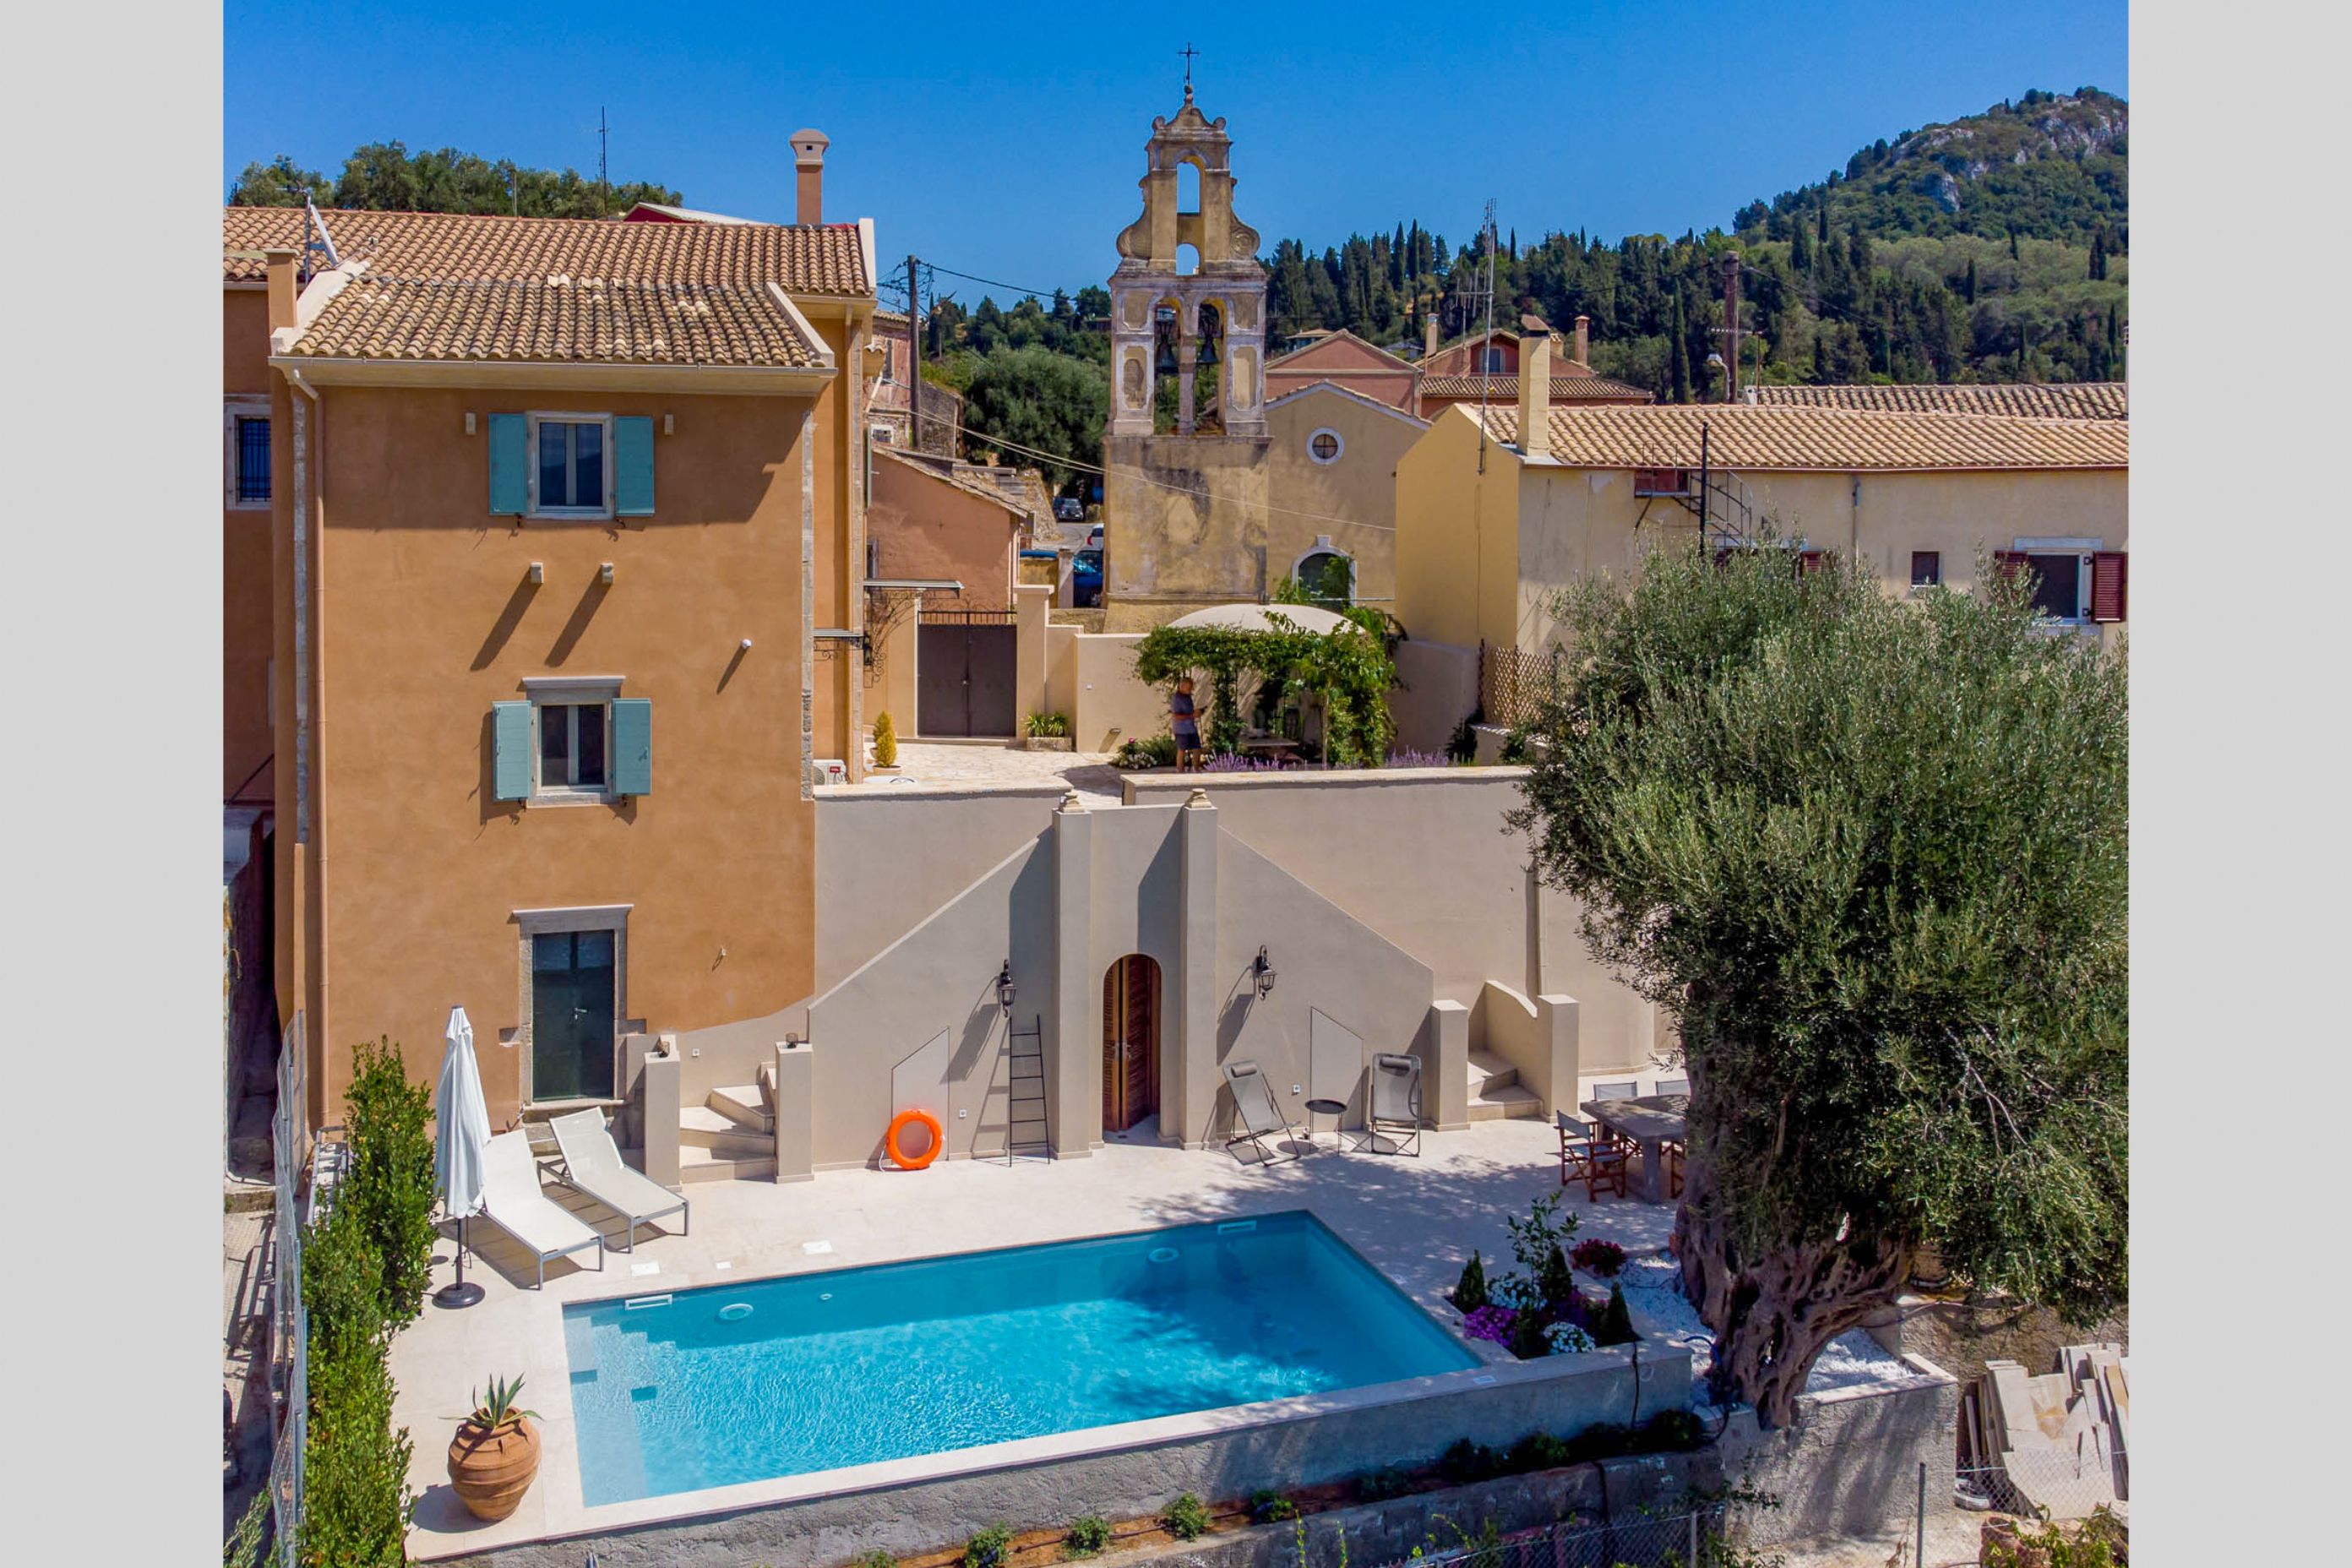 Casa Conti Villa with an amazing heated pool